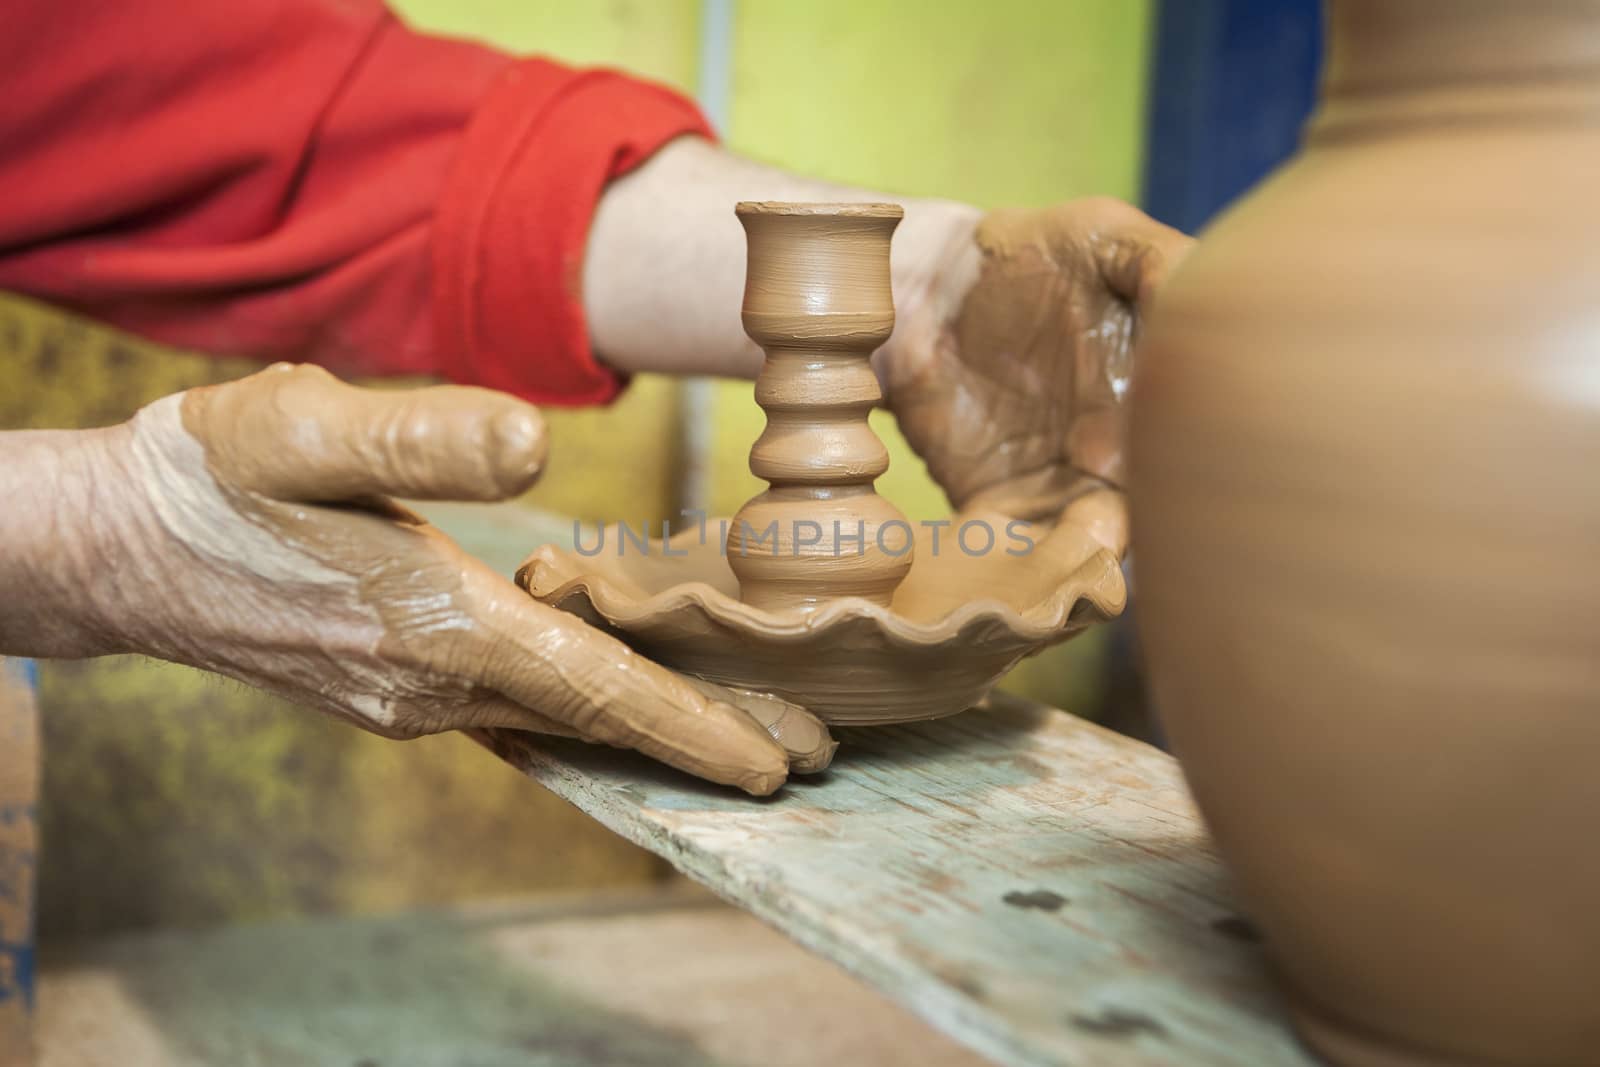 Potter by placing on a table of wood own candle holder of freshly made ceramic, clay pottery ceramics typical of Bailen, Jaen province, Andalucia, Spain